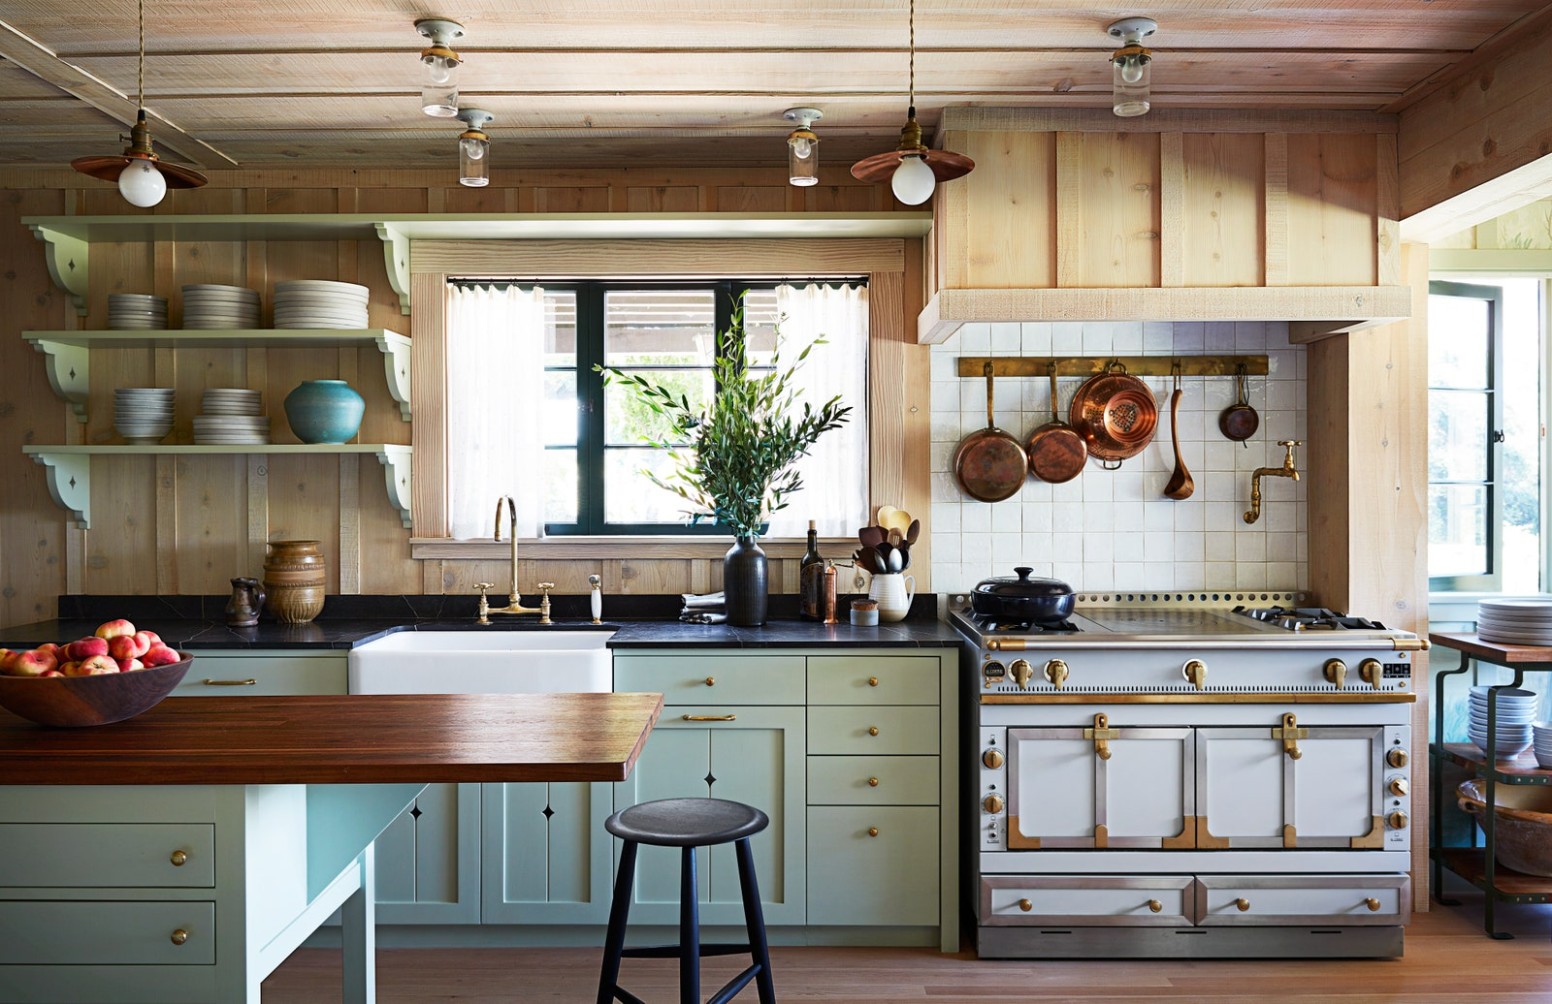 5 of the Best and Brightest Kitchens in AD  Architectural Digest - favorite kitchens architectural digest